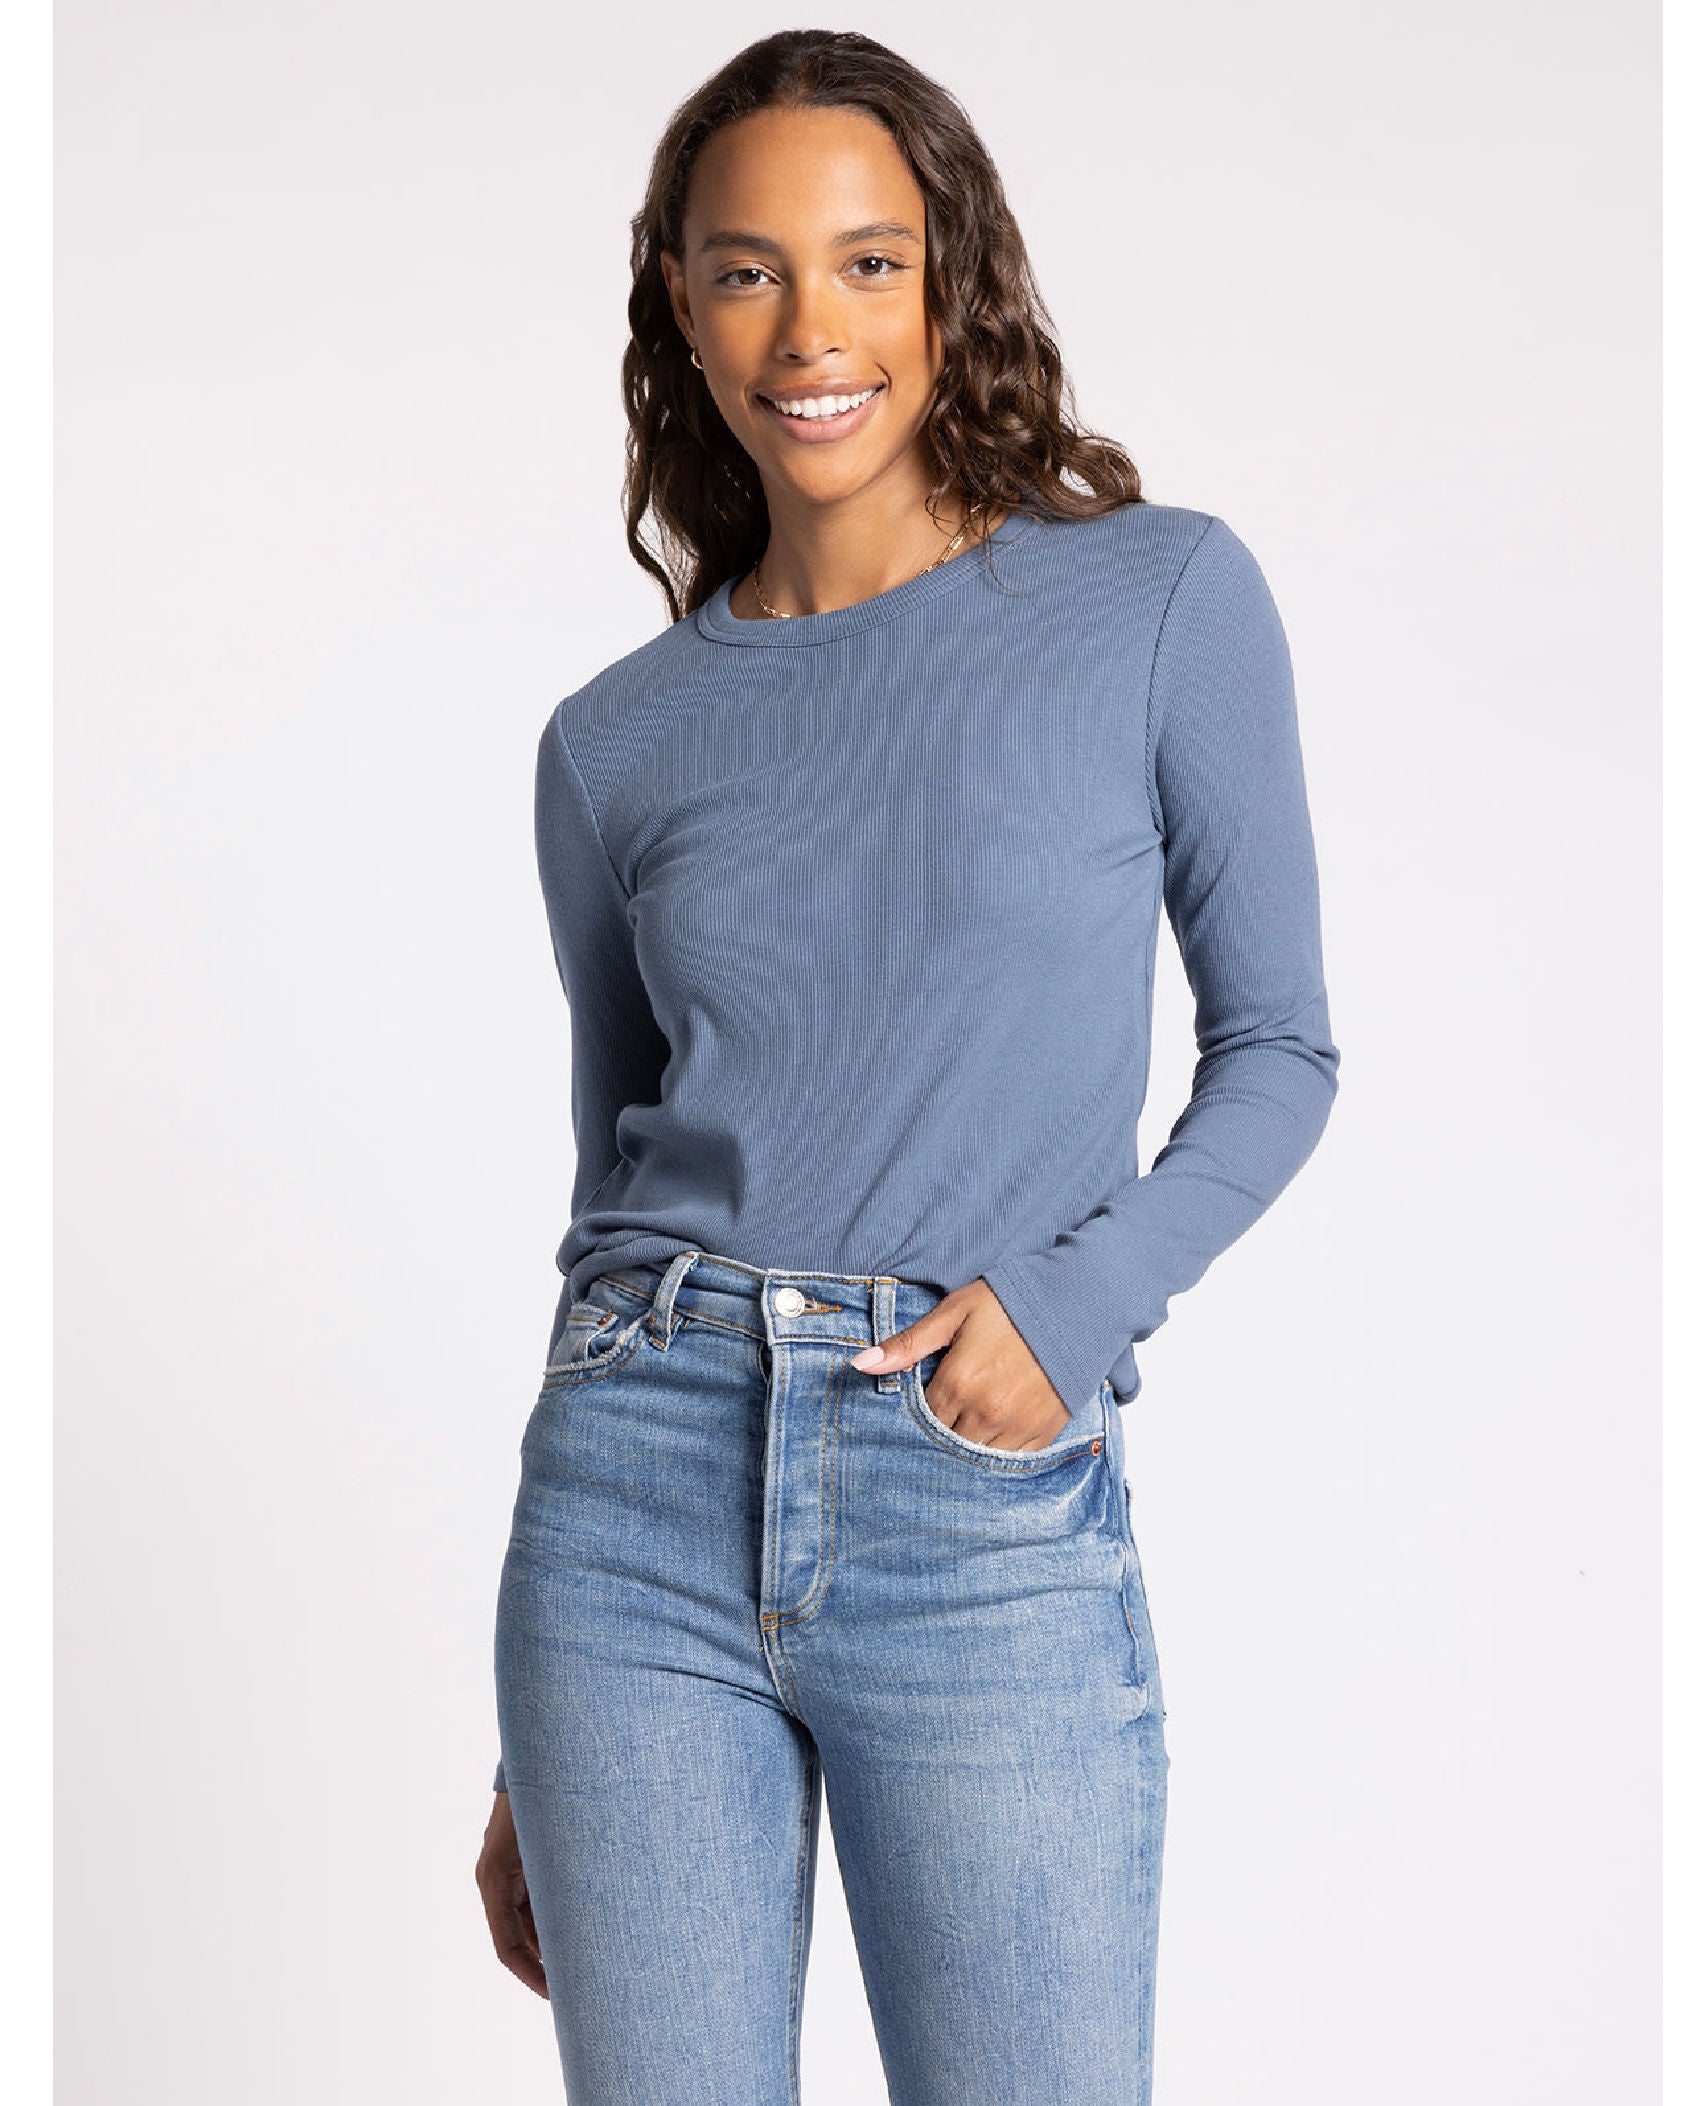 Driftwood Maggie Top by Thread & Supply